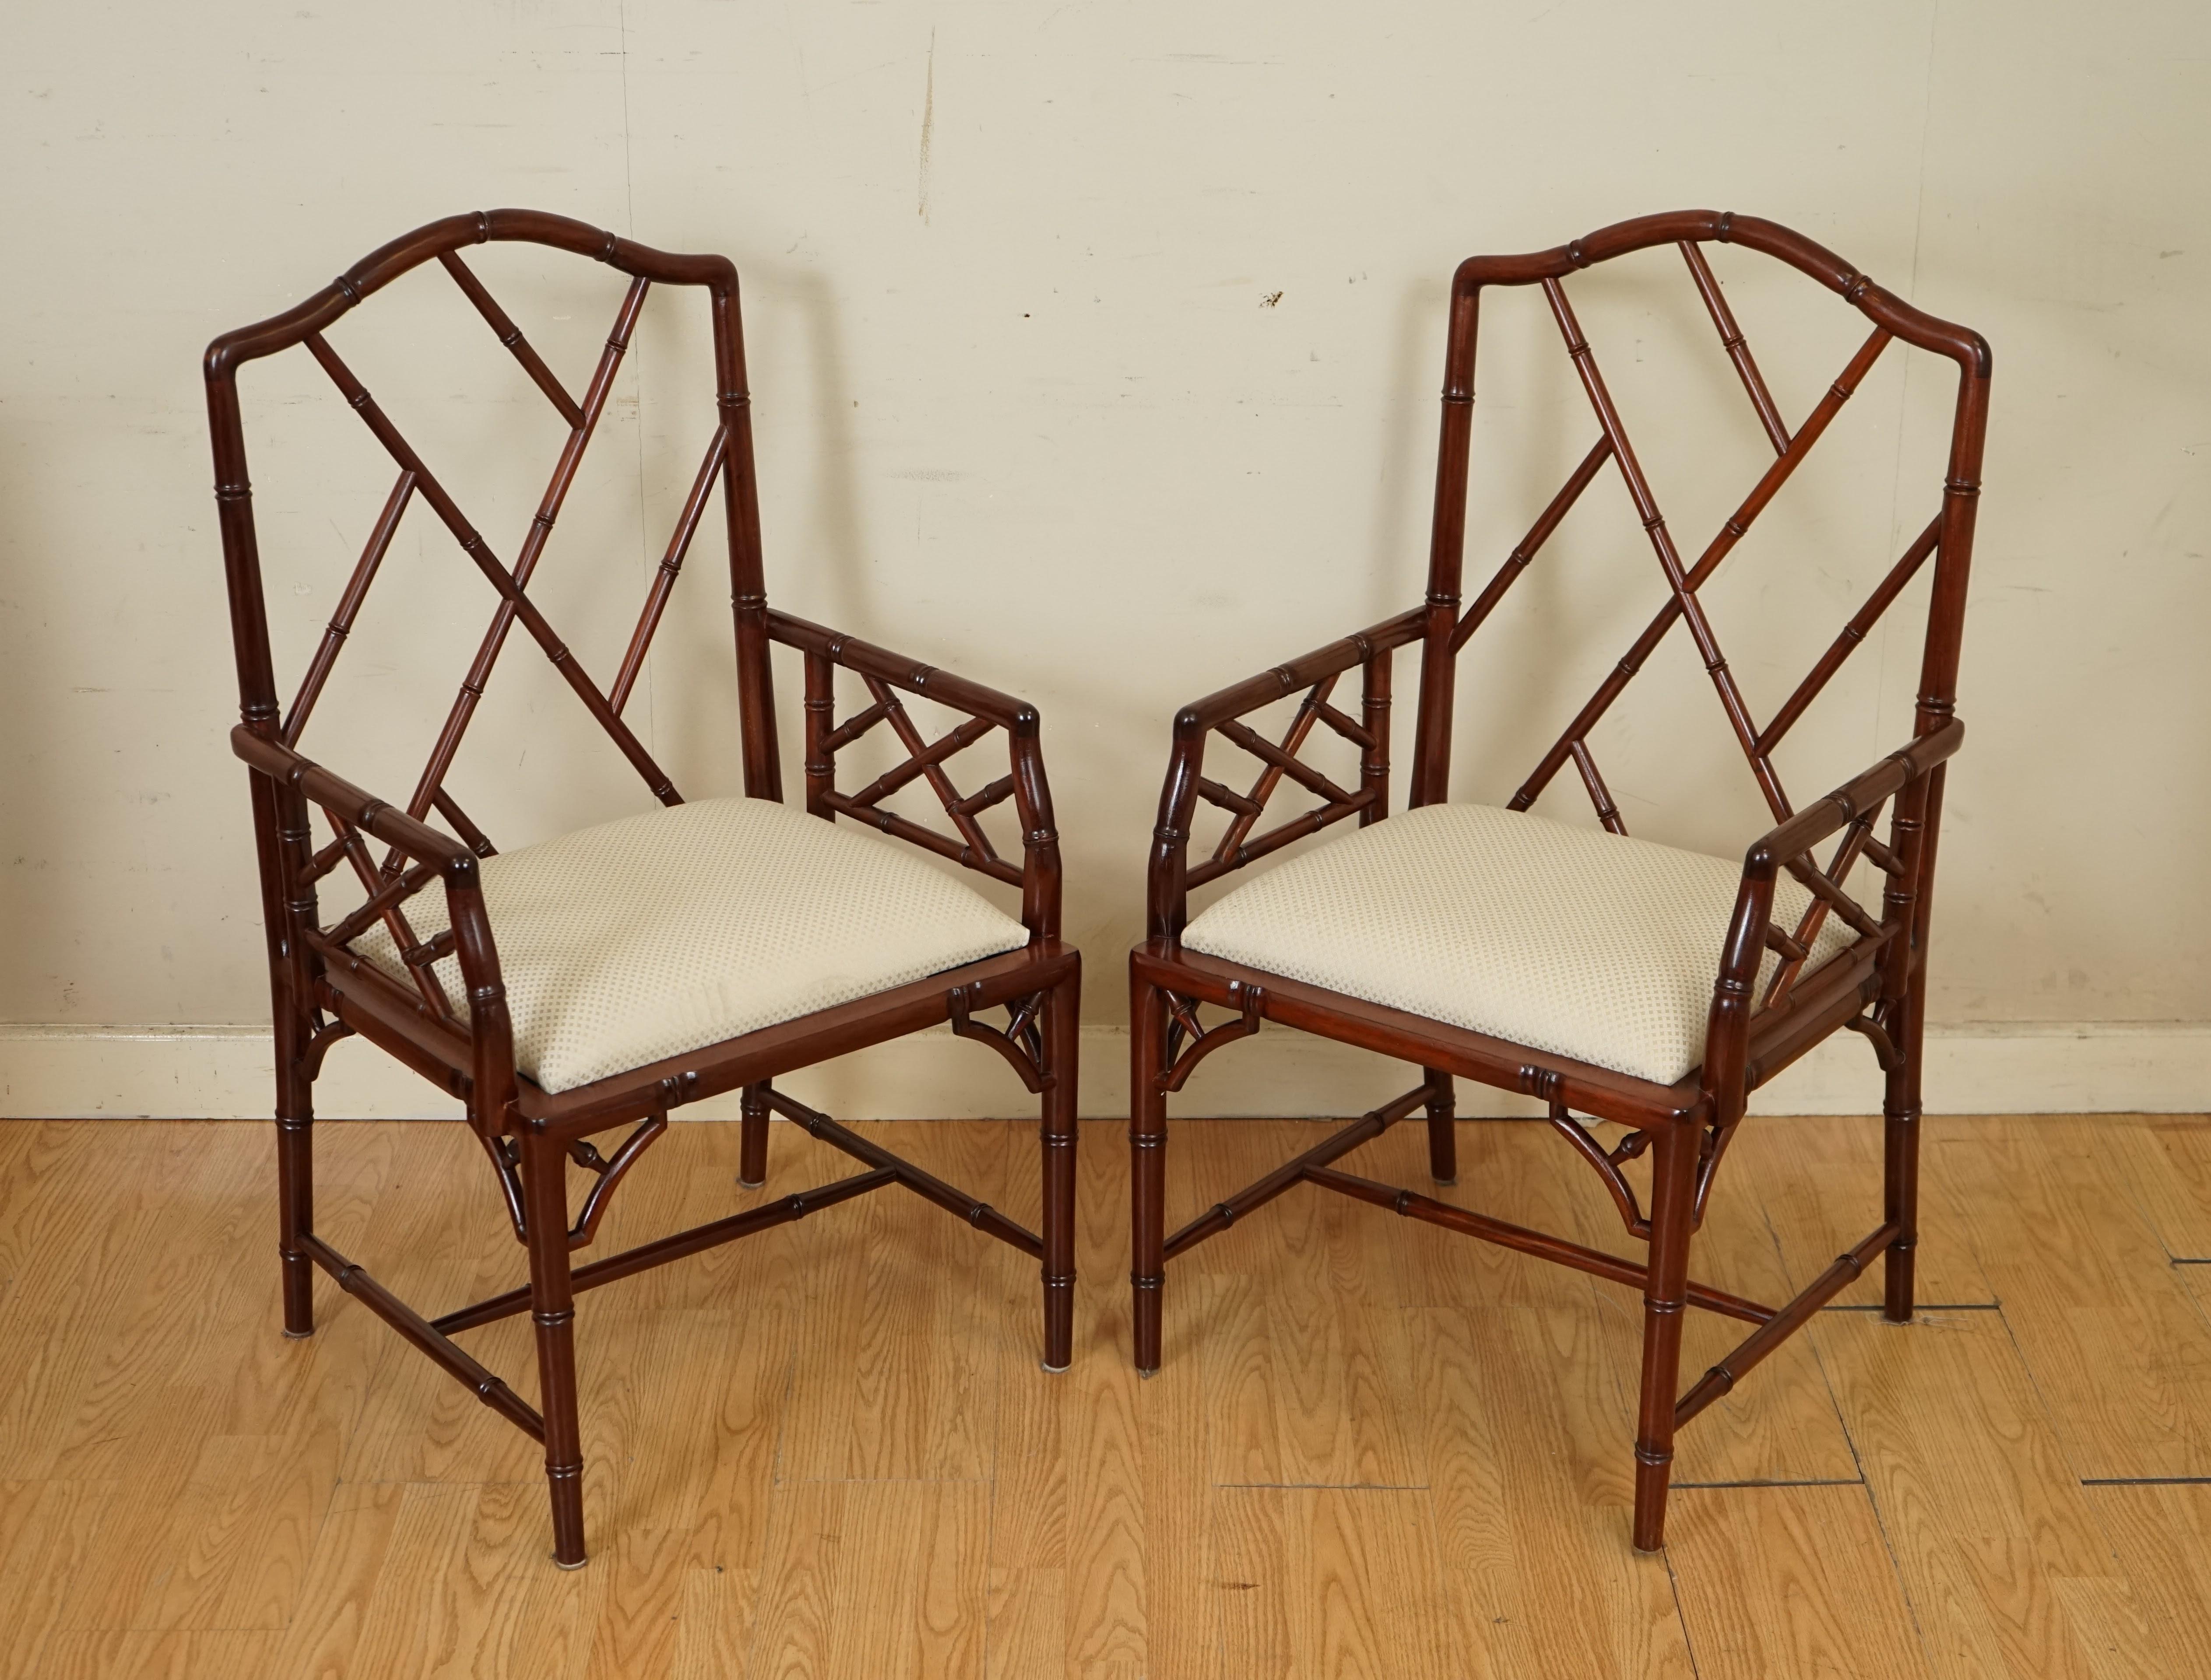 Very Stunning Set of 8 Vintage Bamboo Dinning Chairs with White Fabric Seating 1